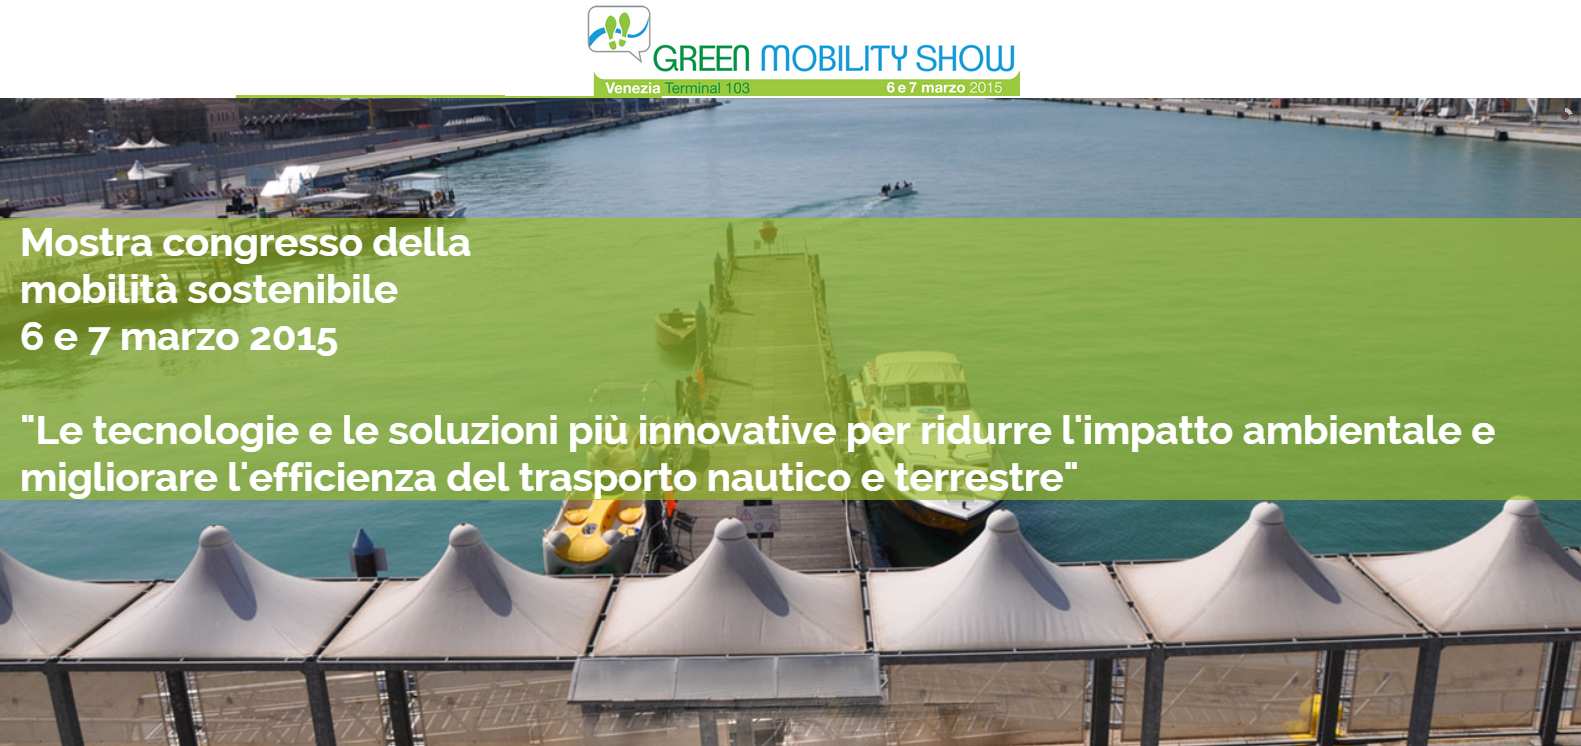 green mobility show